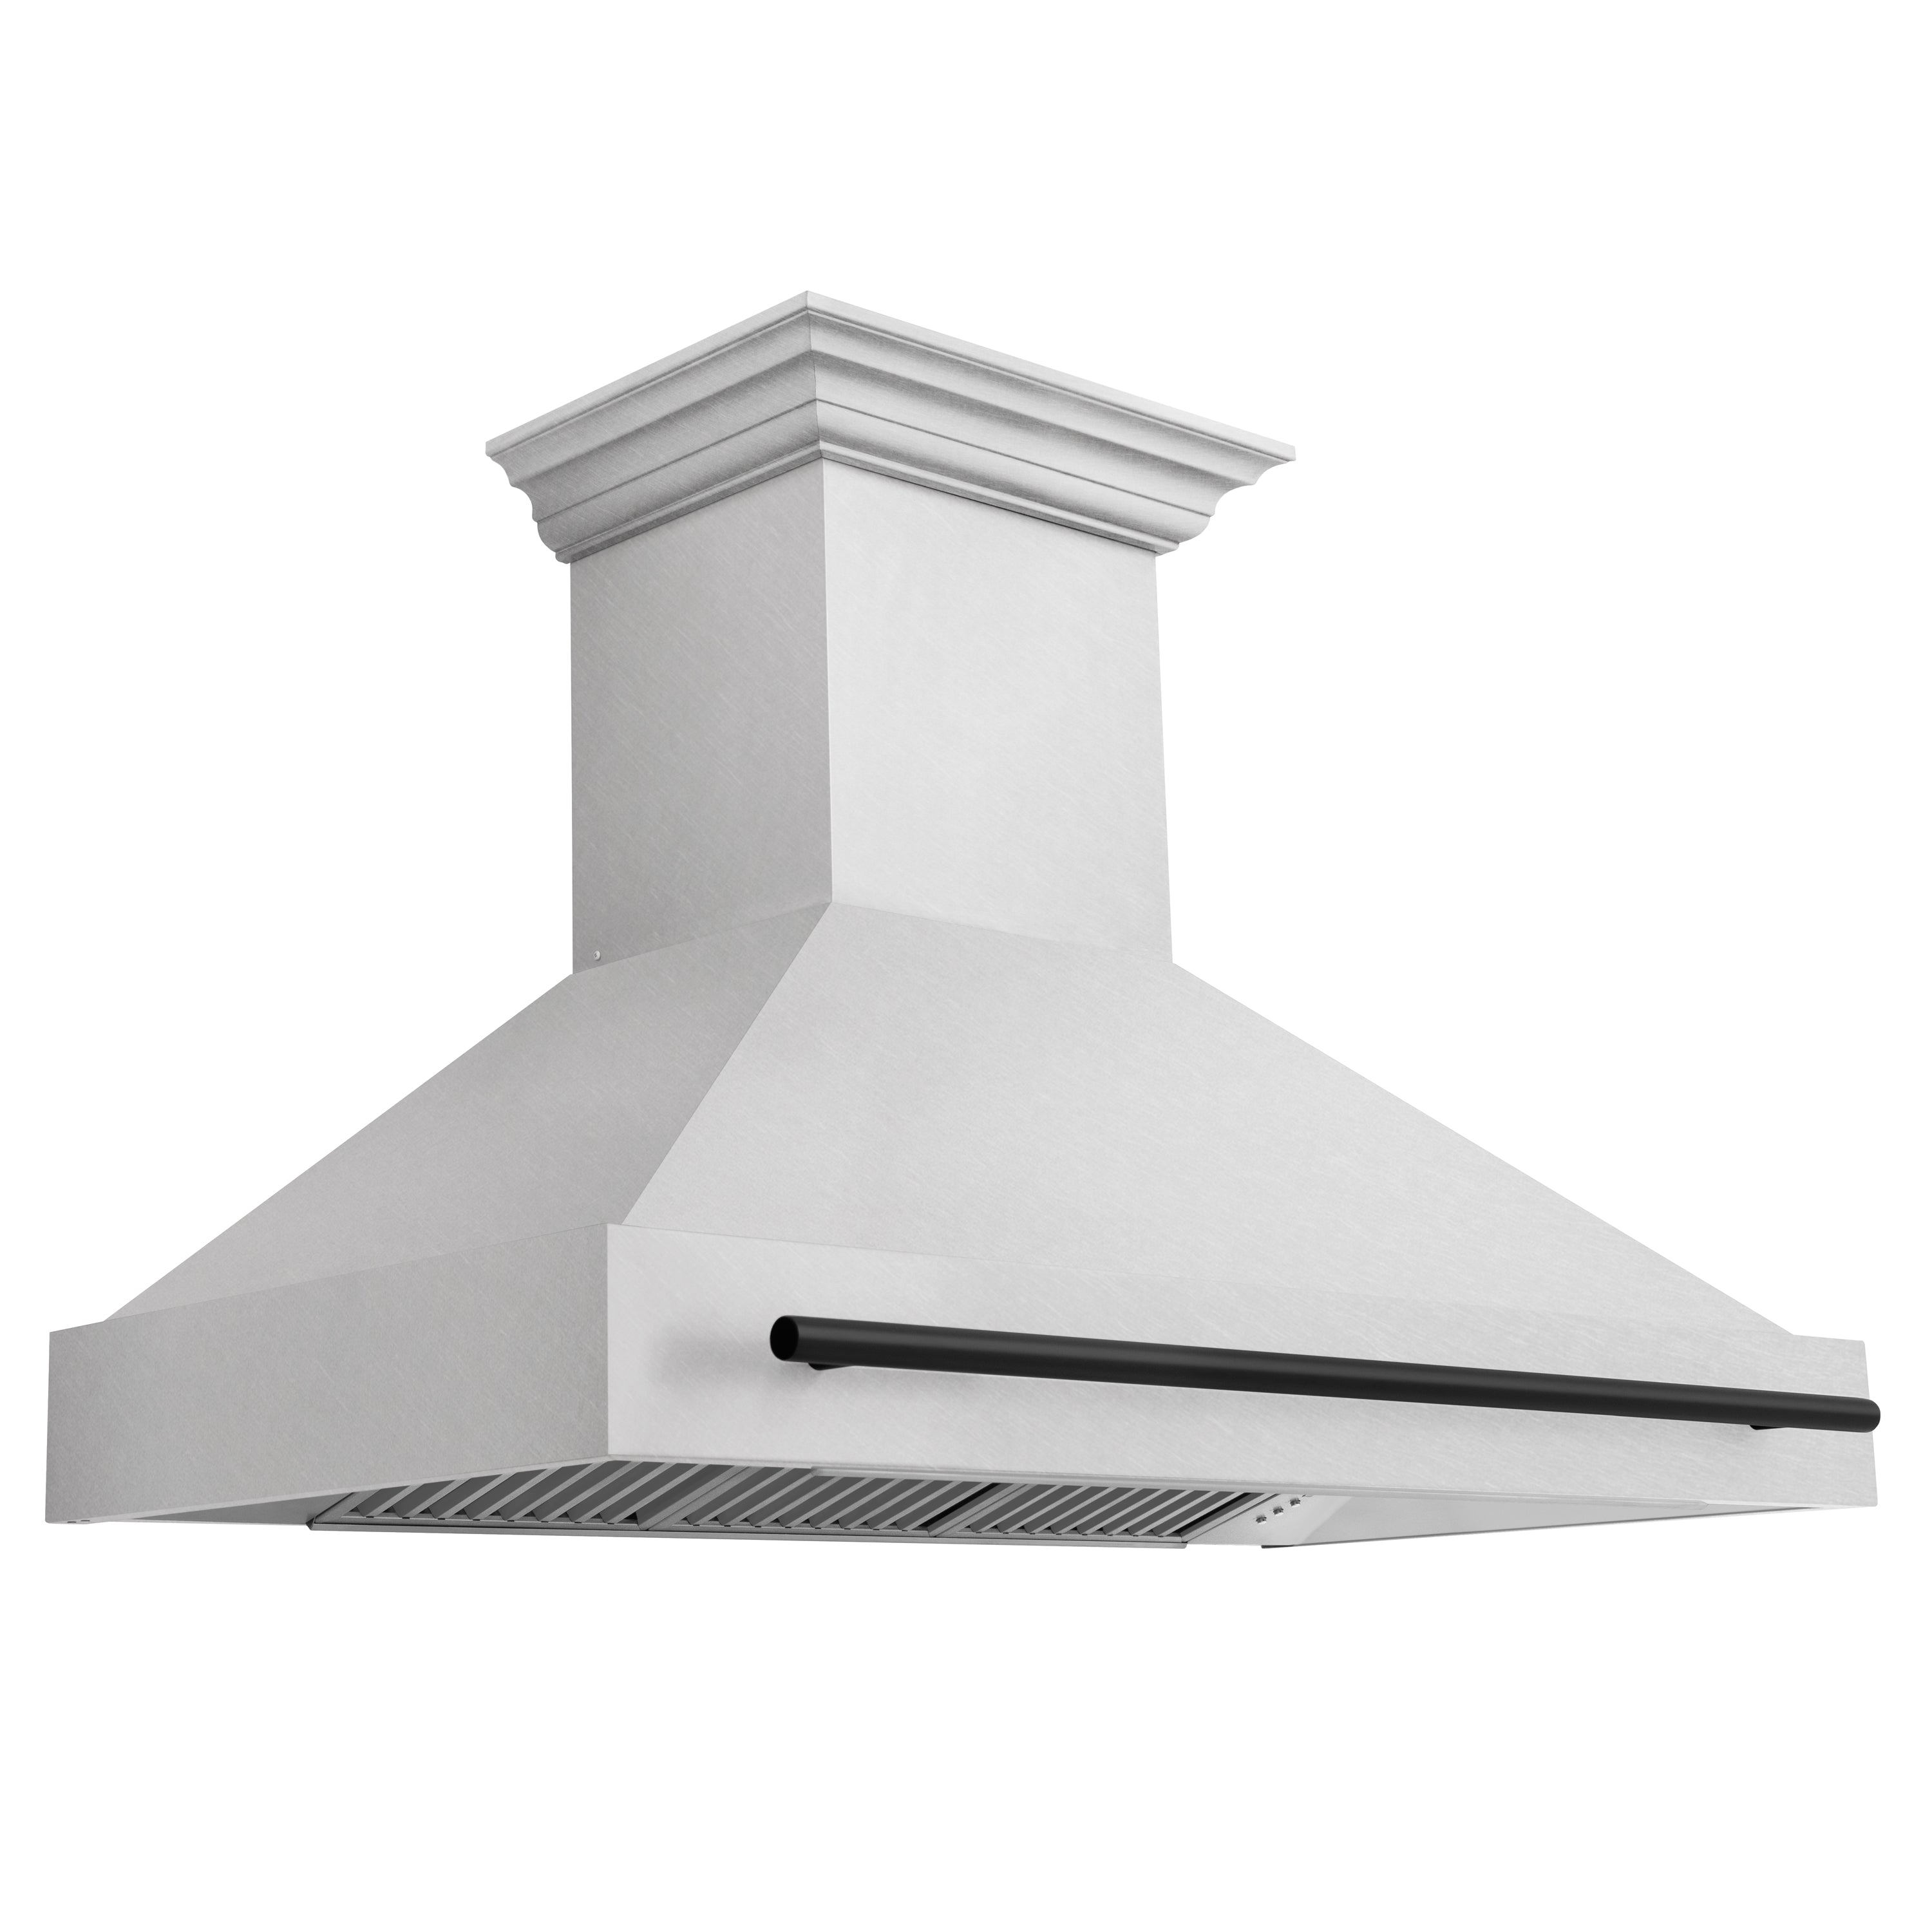 ZLINE Autograph 48 Inch DuraSnow® Stainless Steel Range Hood with DuraSnow® Shell and Matte Black Handle, 8654SNZ-48-MB